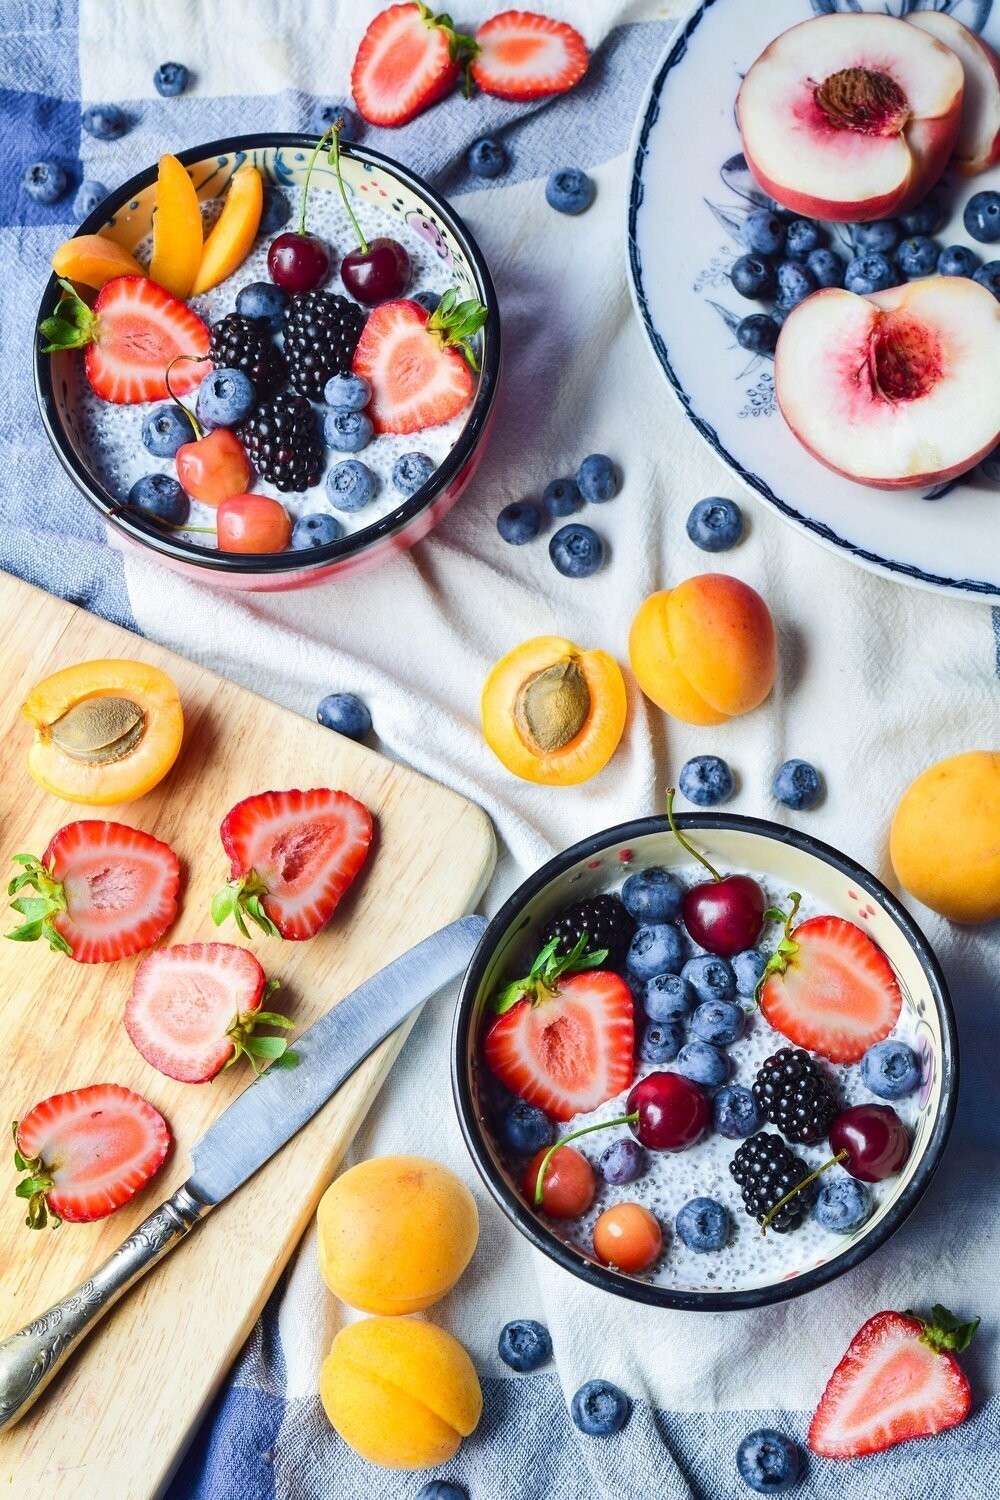 This photo was taken in a beautiful summer day. Bright breakfast of chia seed pudding with fresh seasonal fruit and berries. I want to convey a bit of summer mood to anyone who sees this picture.